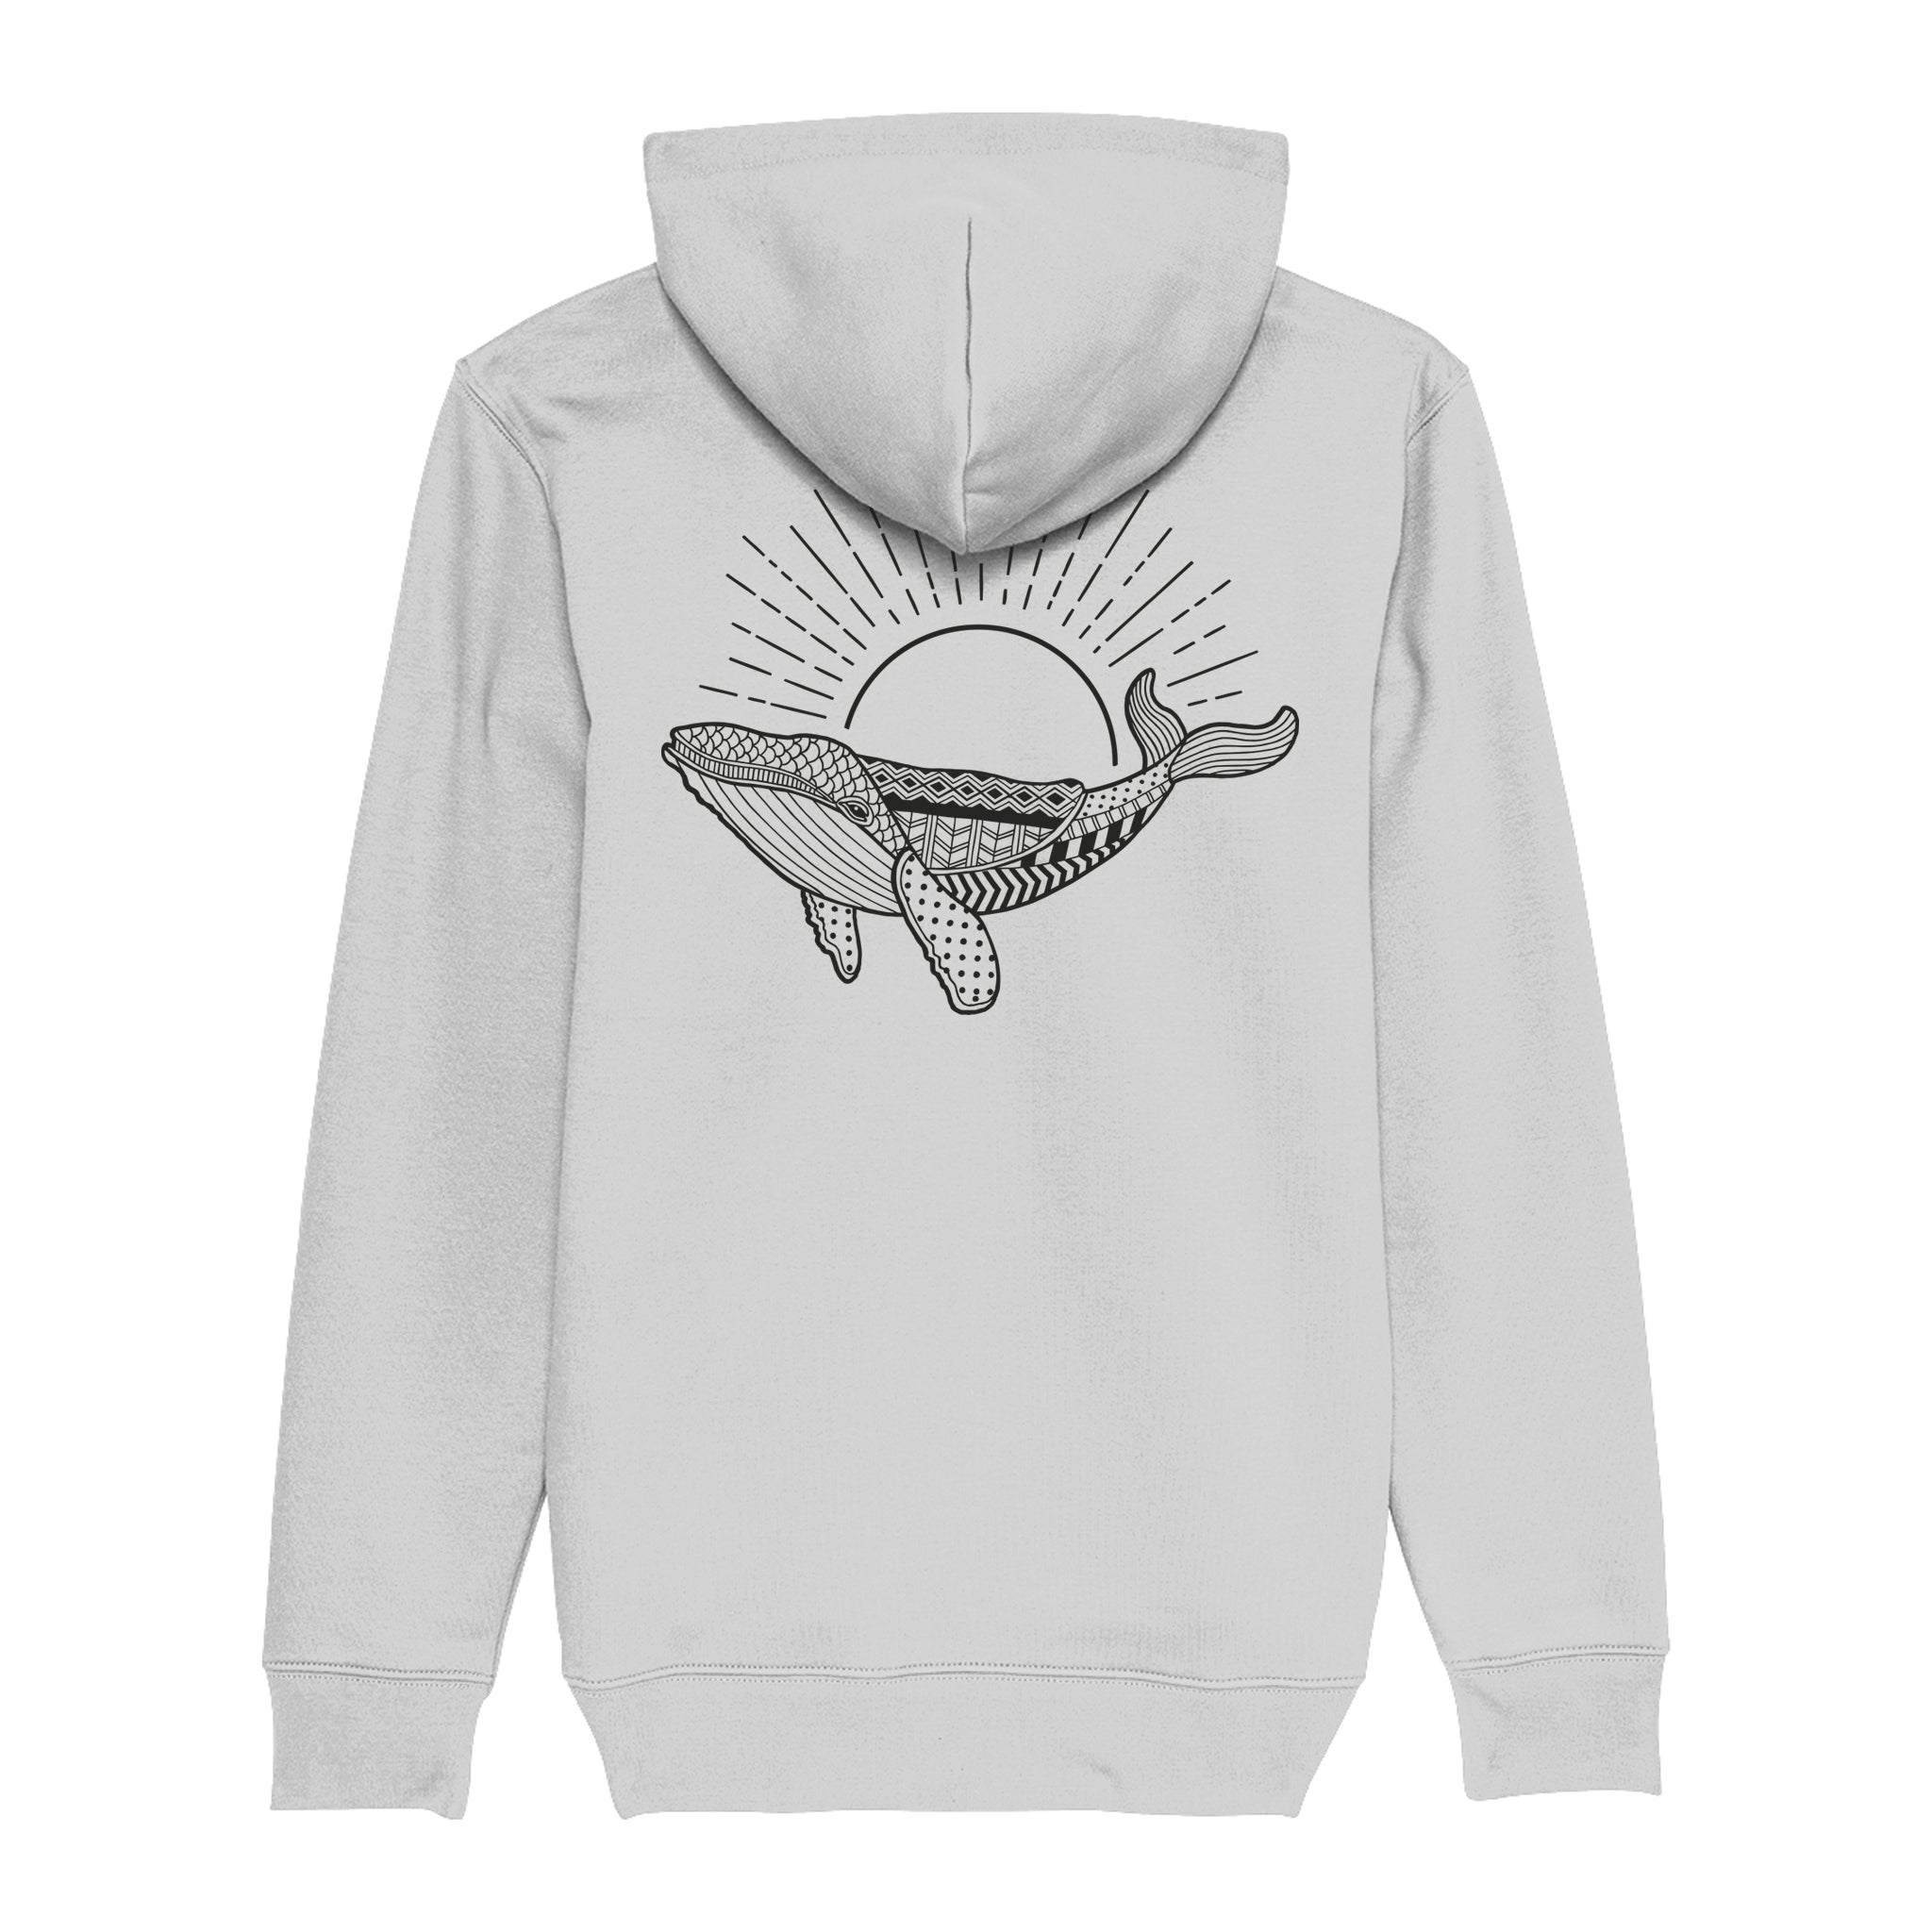 'Gentle Giant' Unisex Hoodies (Outlet)